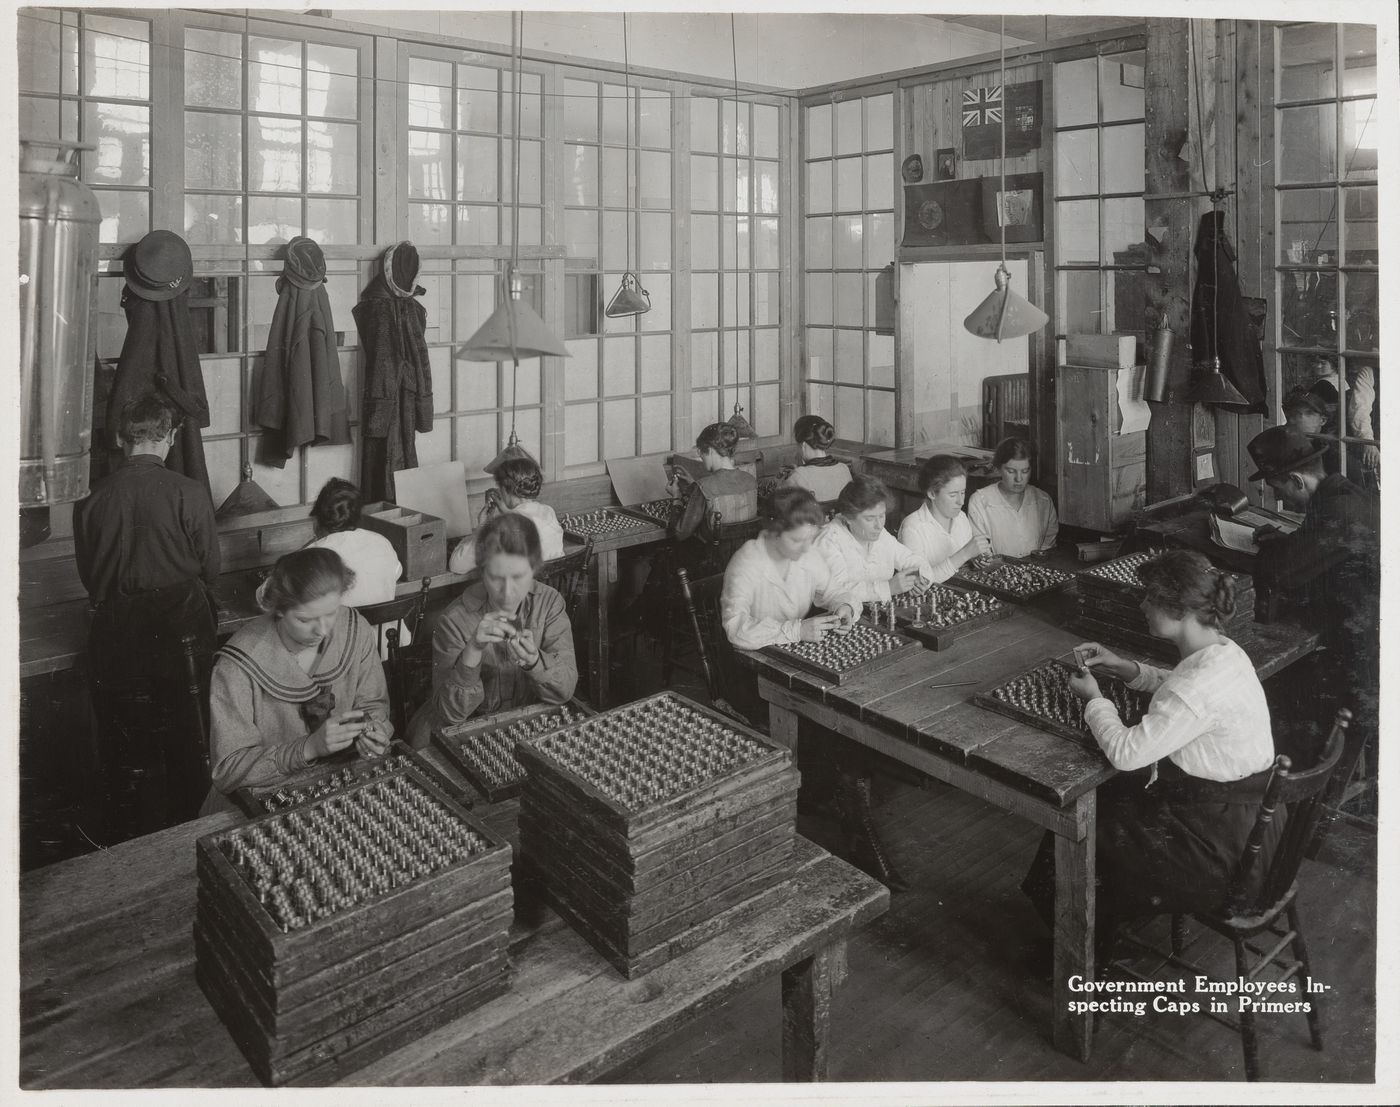 Interior view of workers inspecting caps in primers at the Energite Explosives Plant No. 3, the Shell Loading Plant, Renfrew, Ontario, Canada